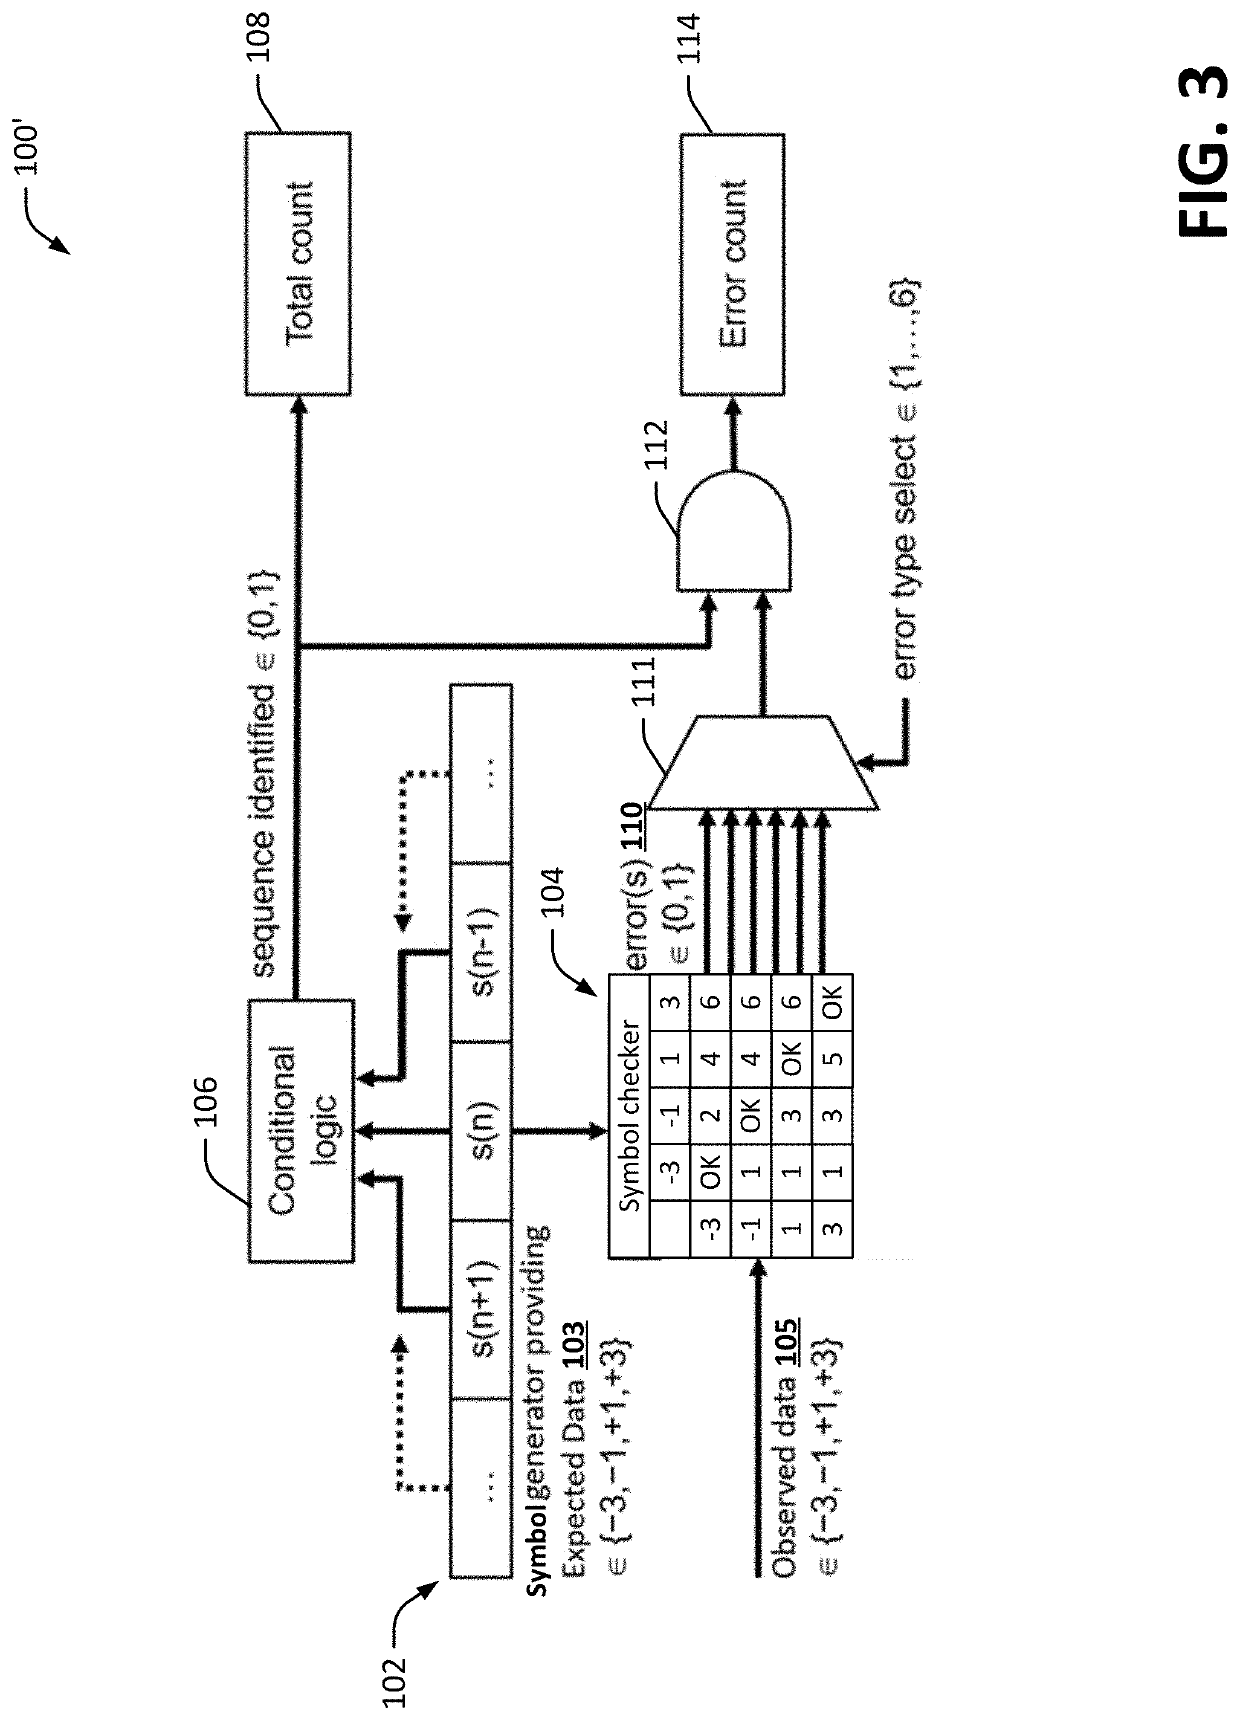 Method and apparatus for symbol-error-rate (SER) based tuning of transmitters and receivers